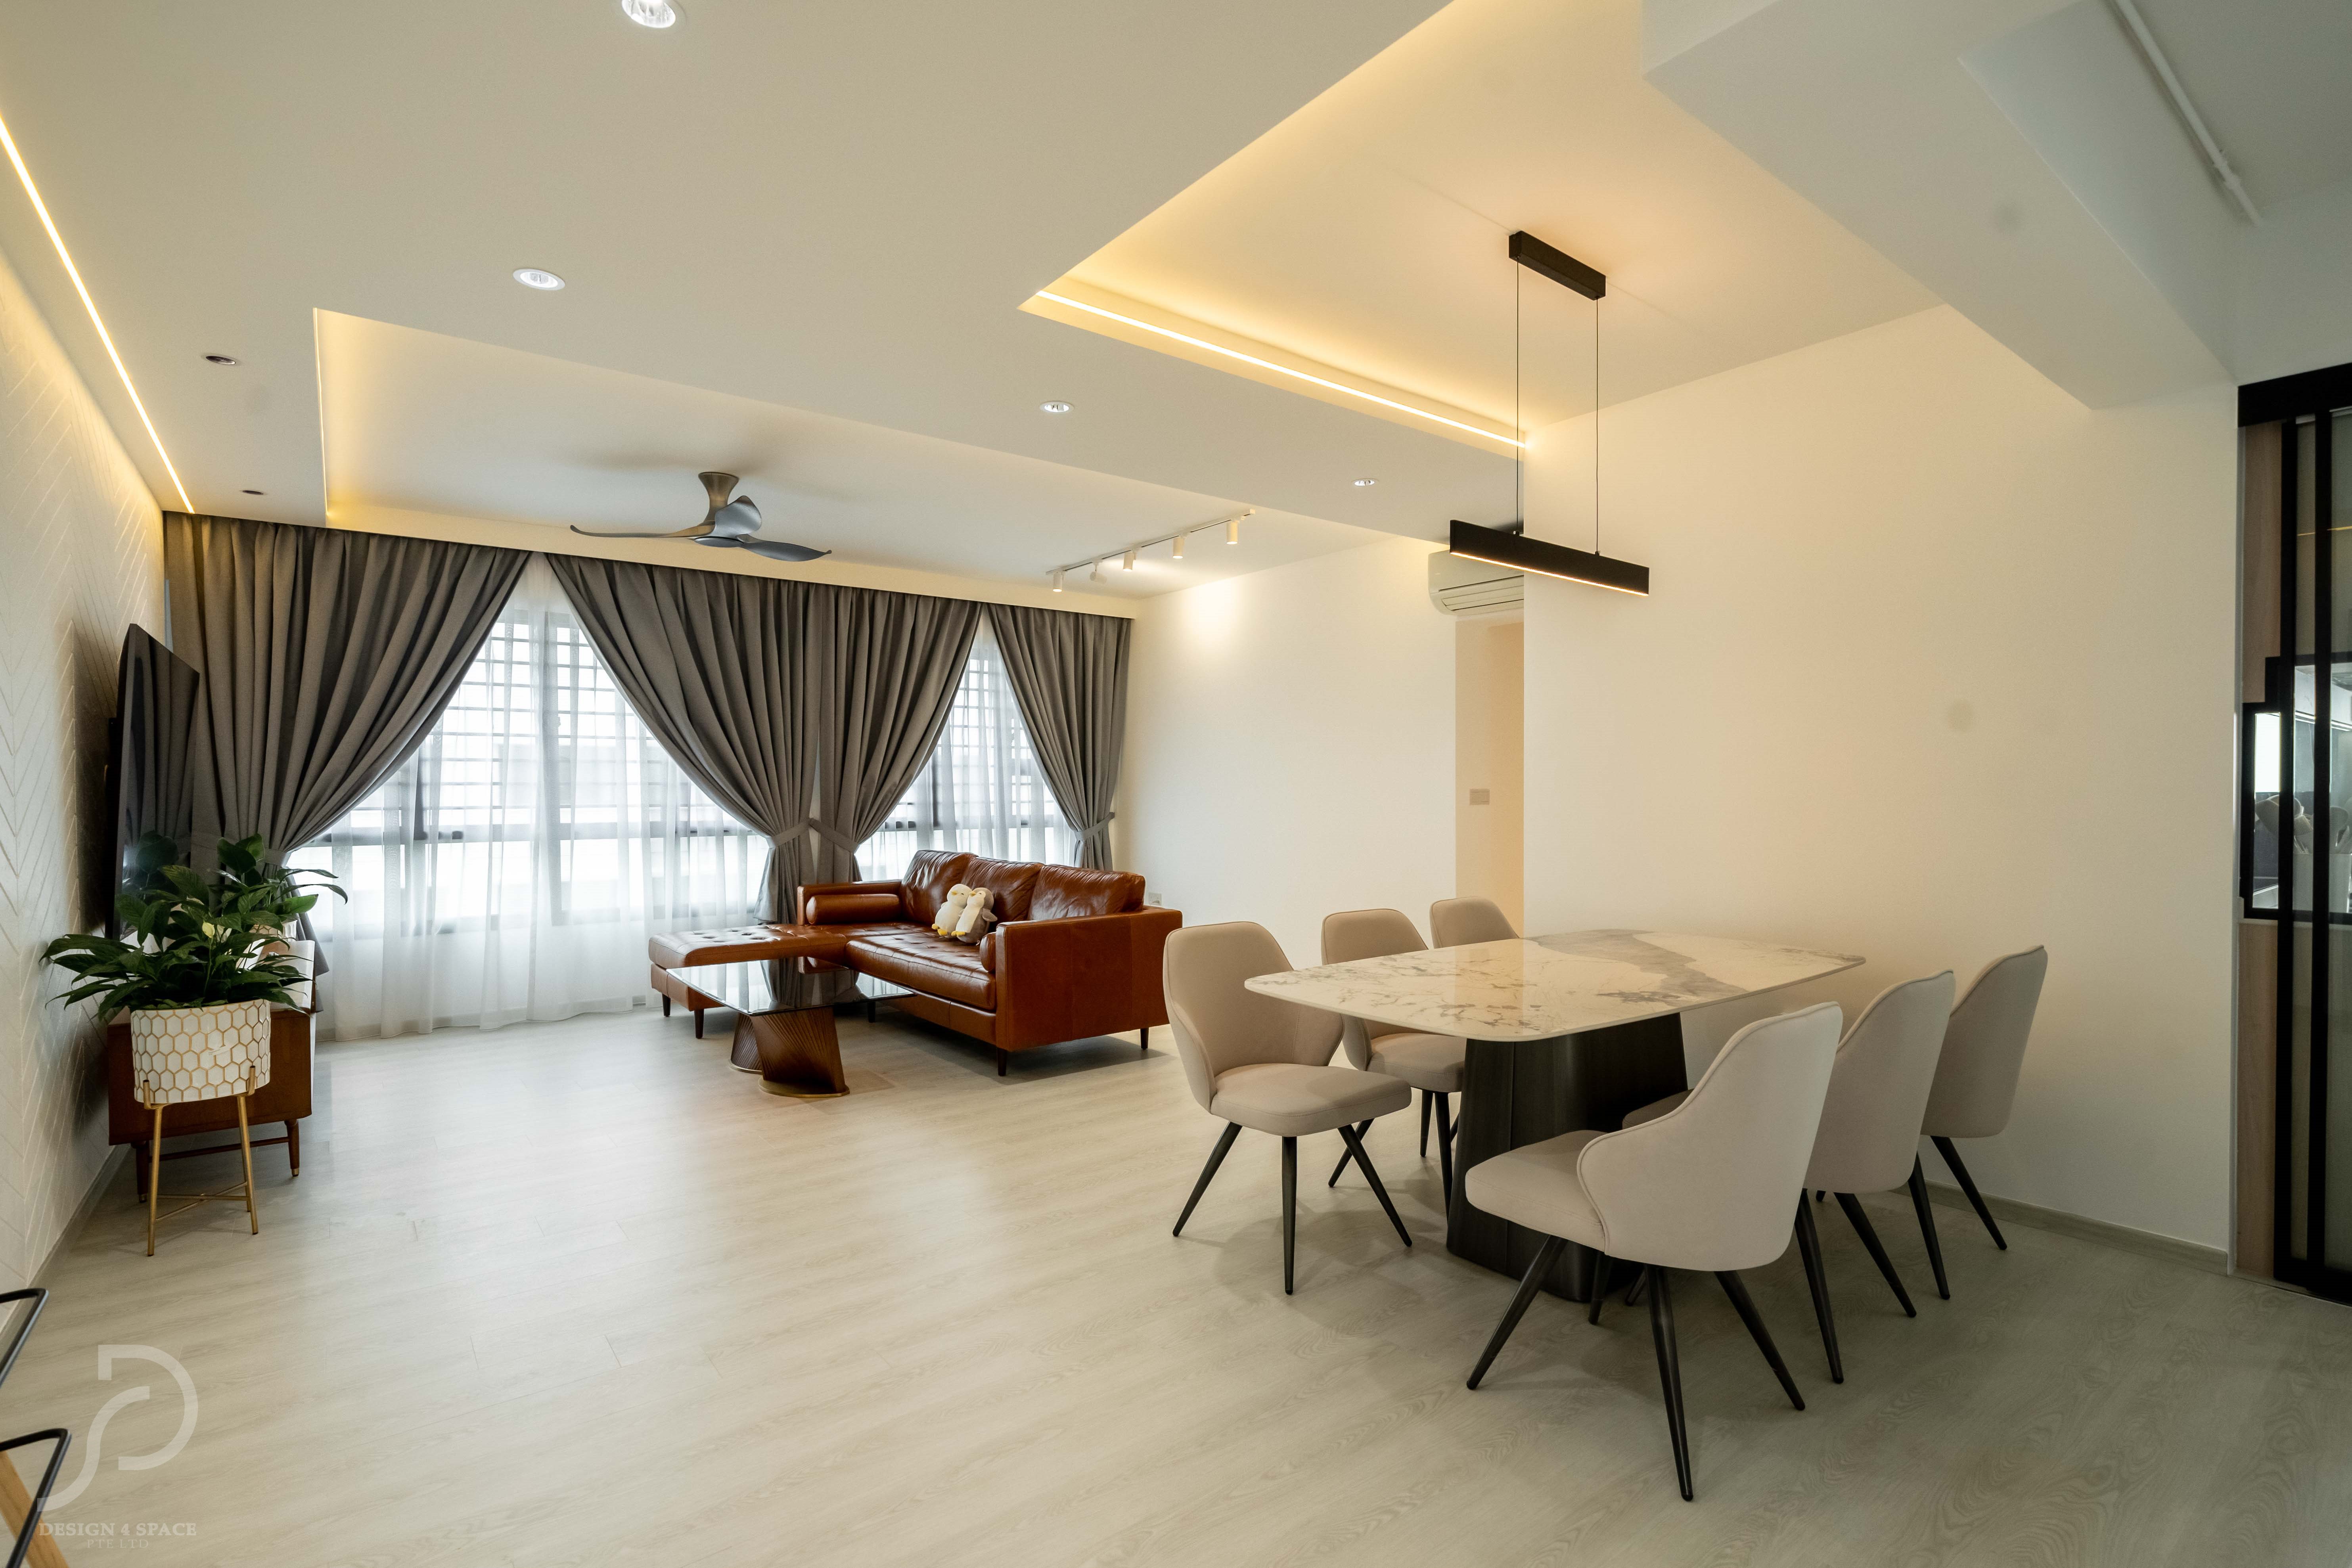 Classical, Contemporary Design - Living Room - HDB 5 Room - Design by Design 4 Space Pte Ltd